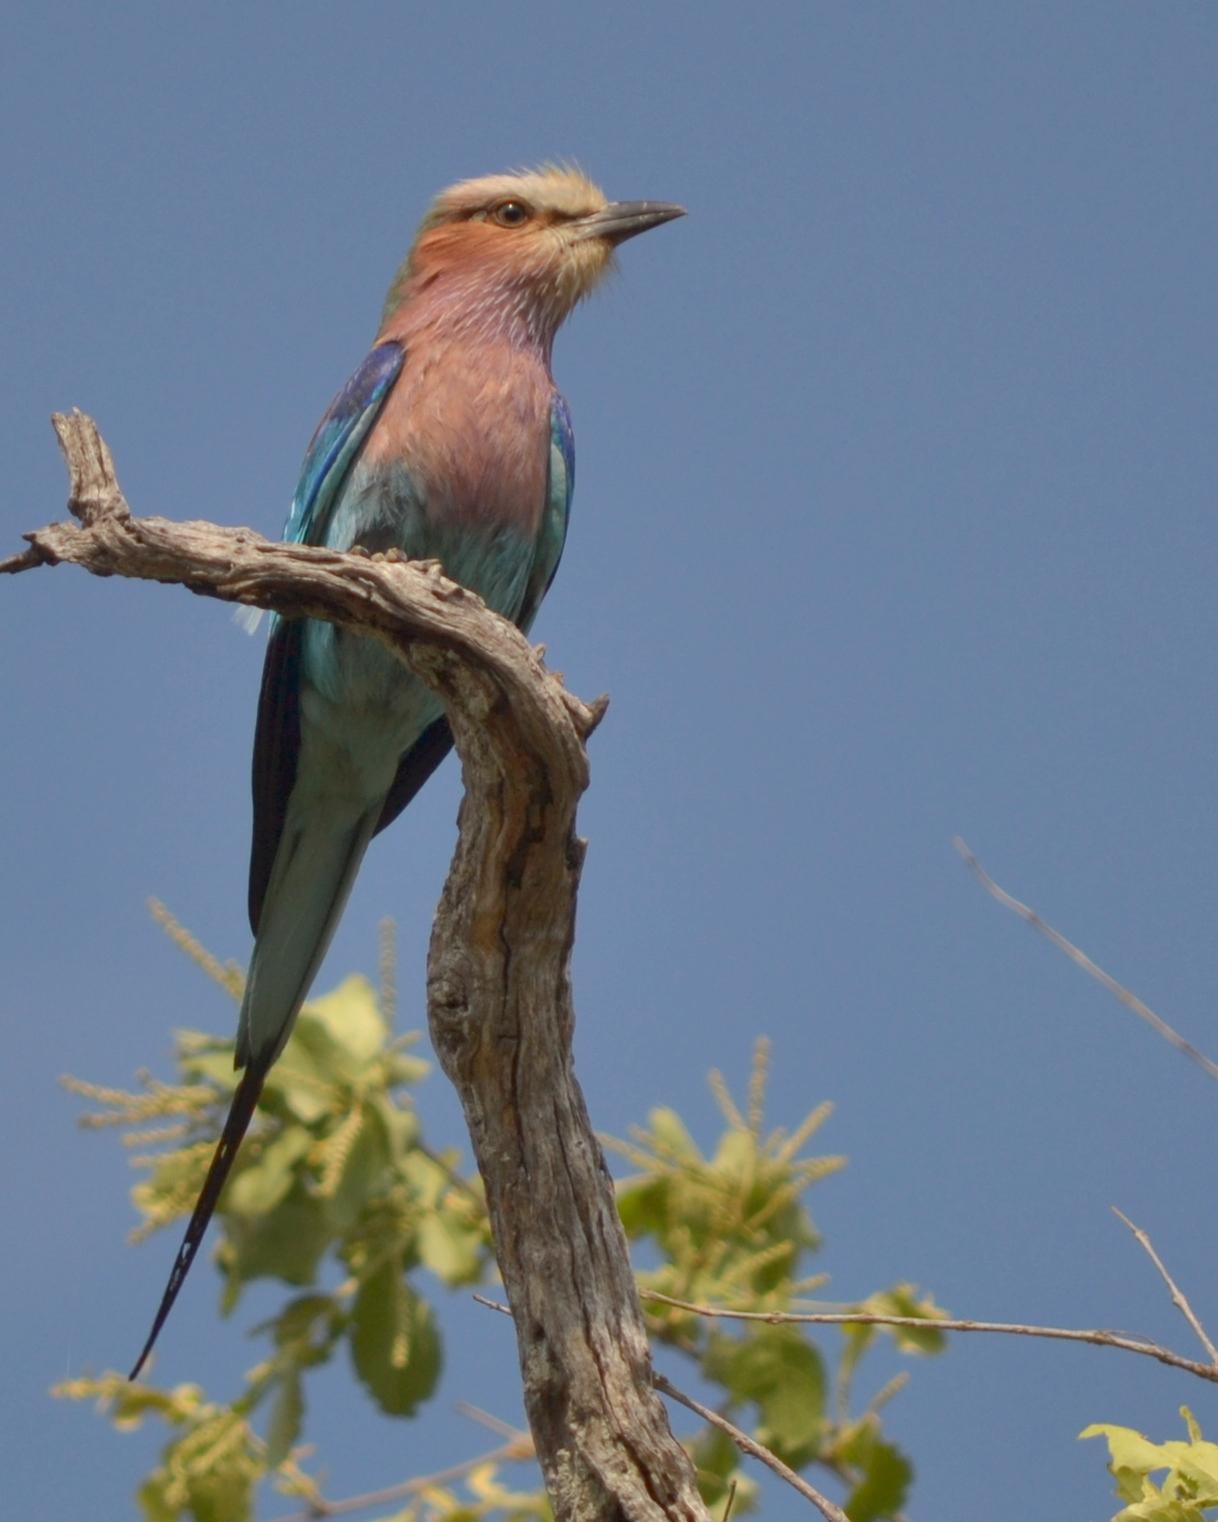 Lilac-breasted Roller Photo by George Mayfield